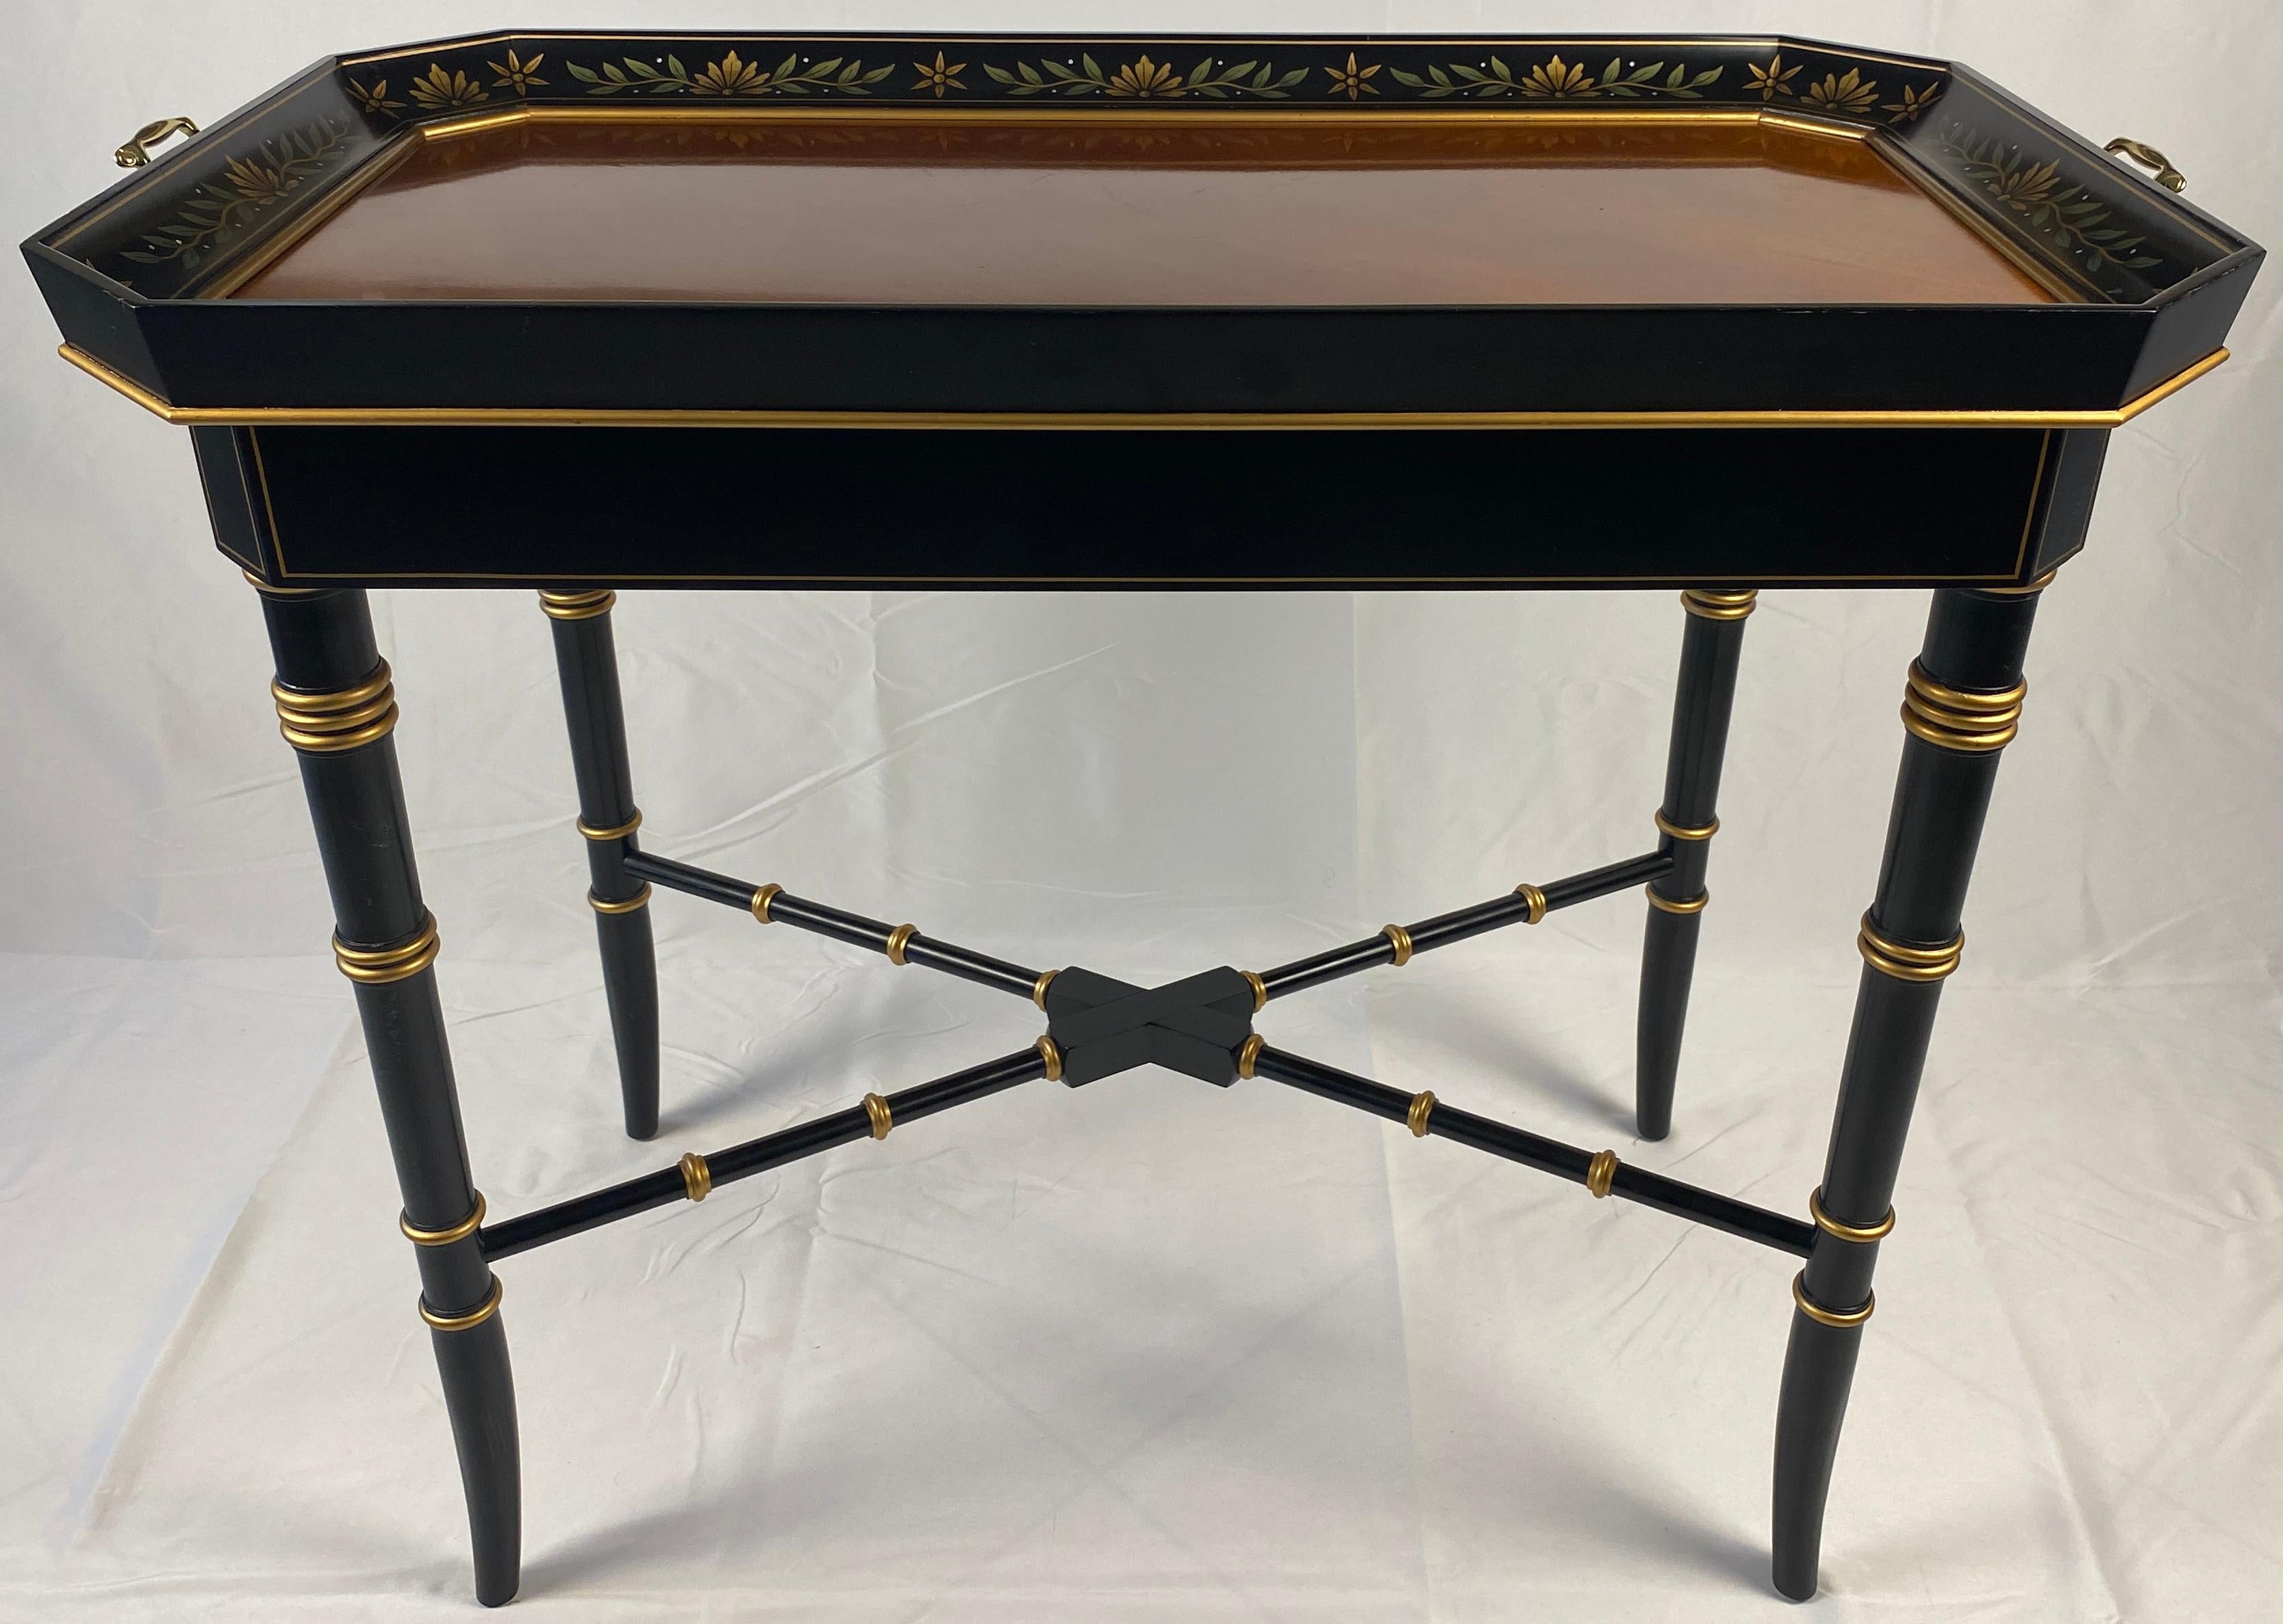 Varnished Black and Gold Wooden Tray Table Bamboo Style Legs For Sale